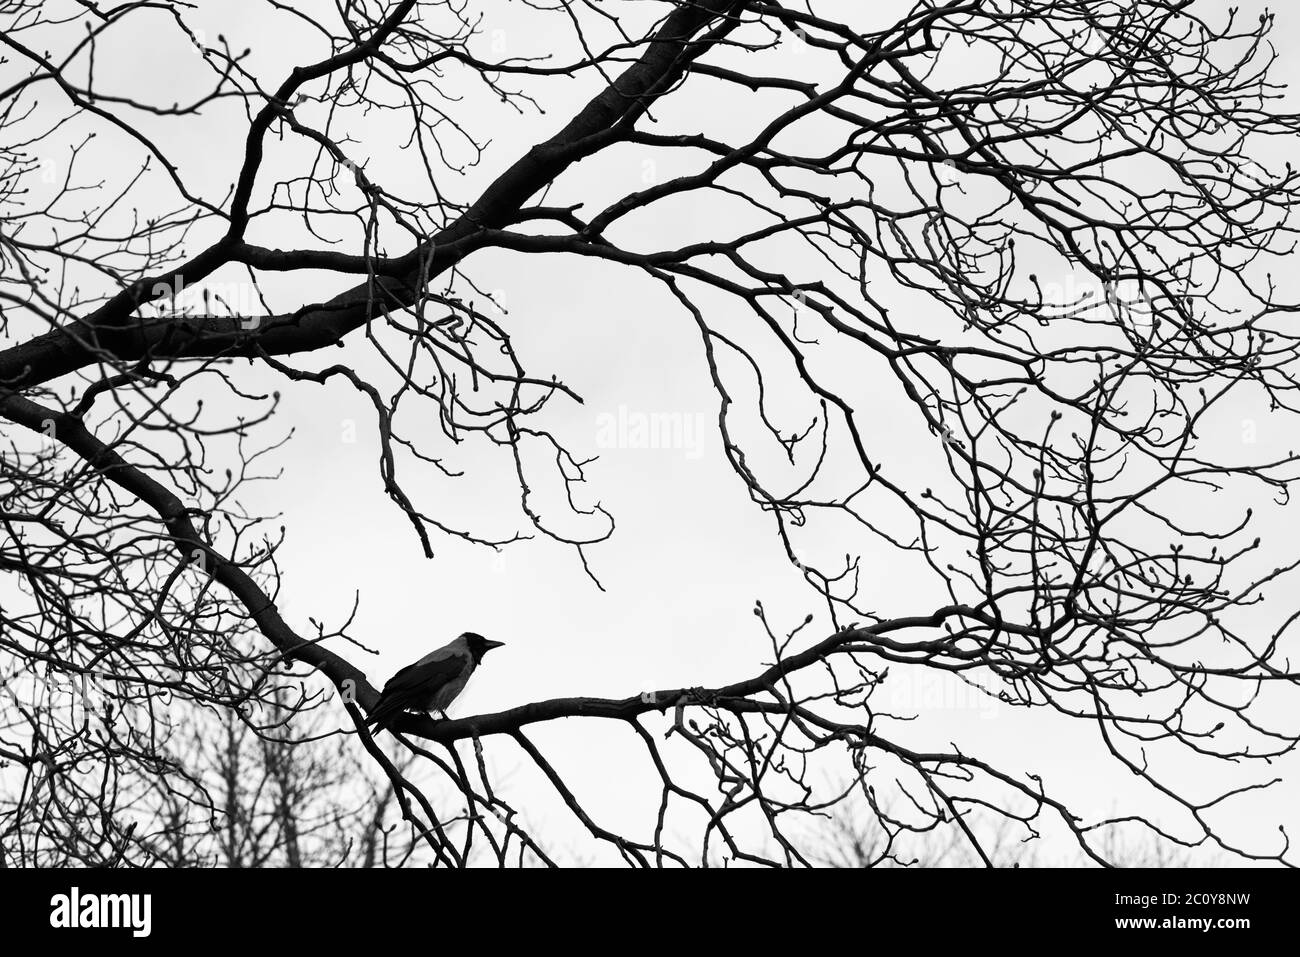 Crows  on tree branches. Black and white Stock Photo